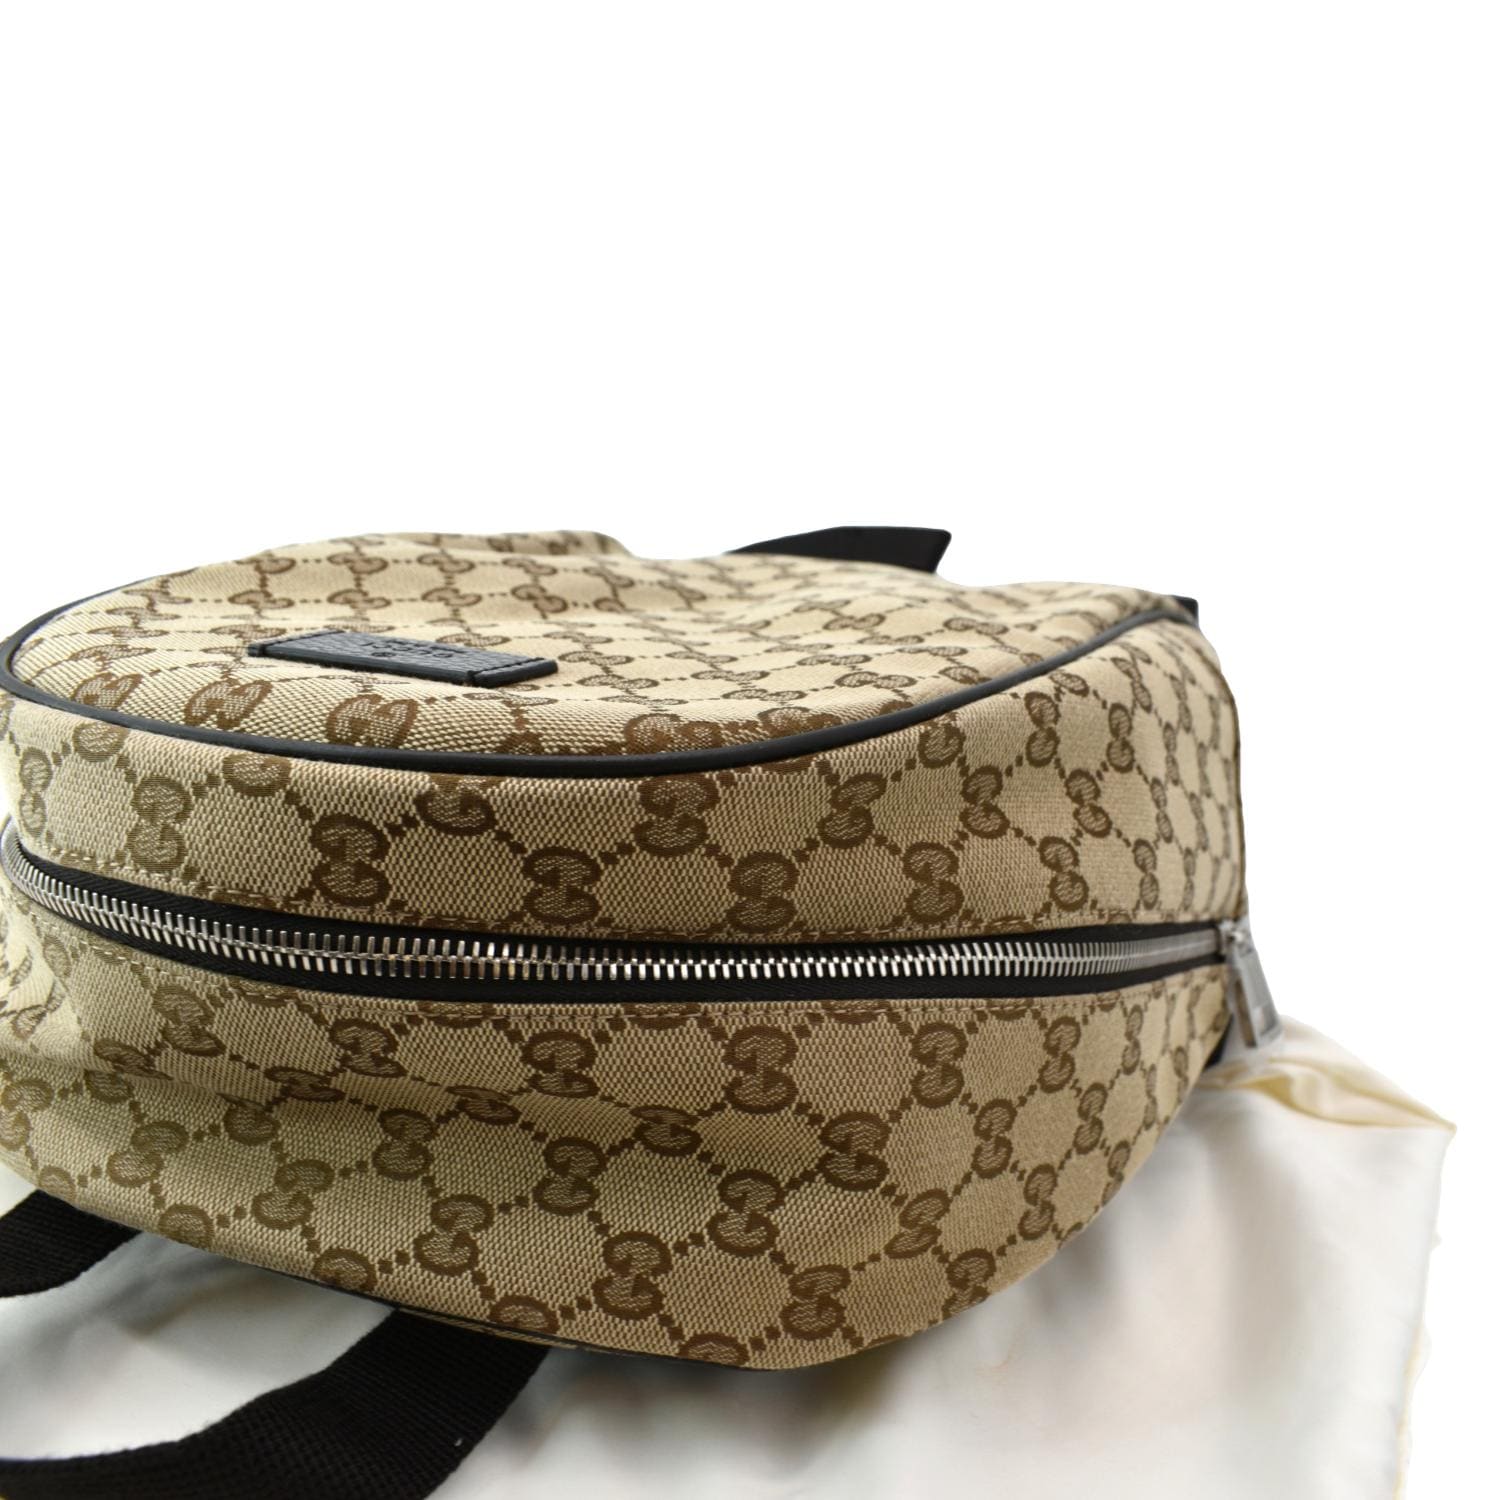 Gucci Brown Monogram Canvas Travel Backpack - Boca Pawn